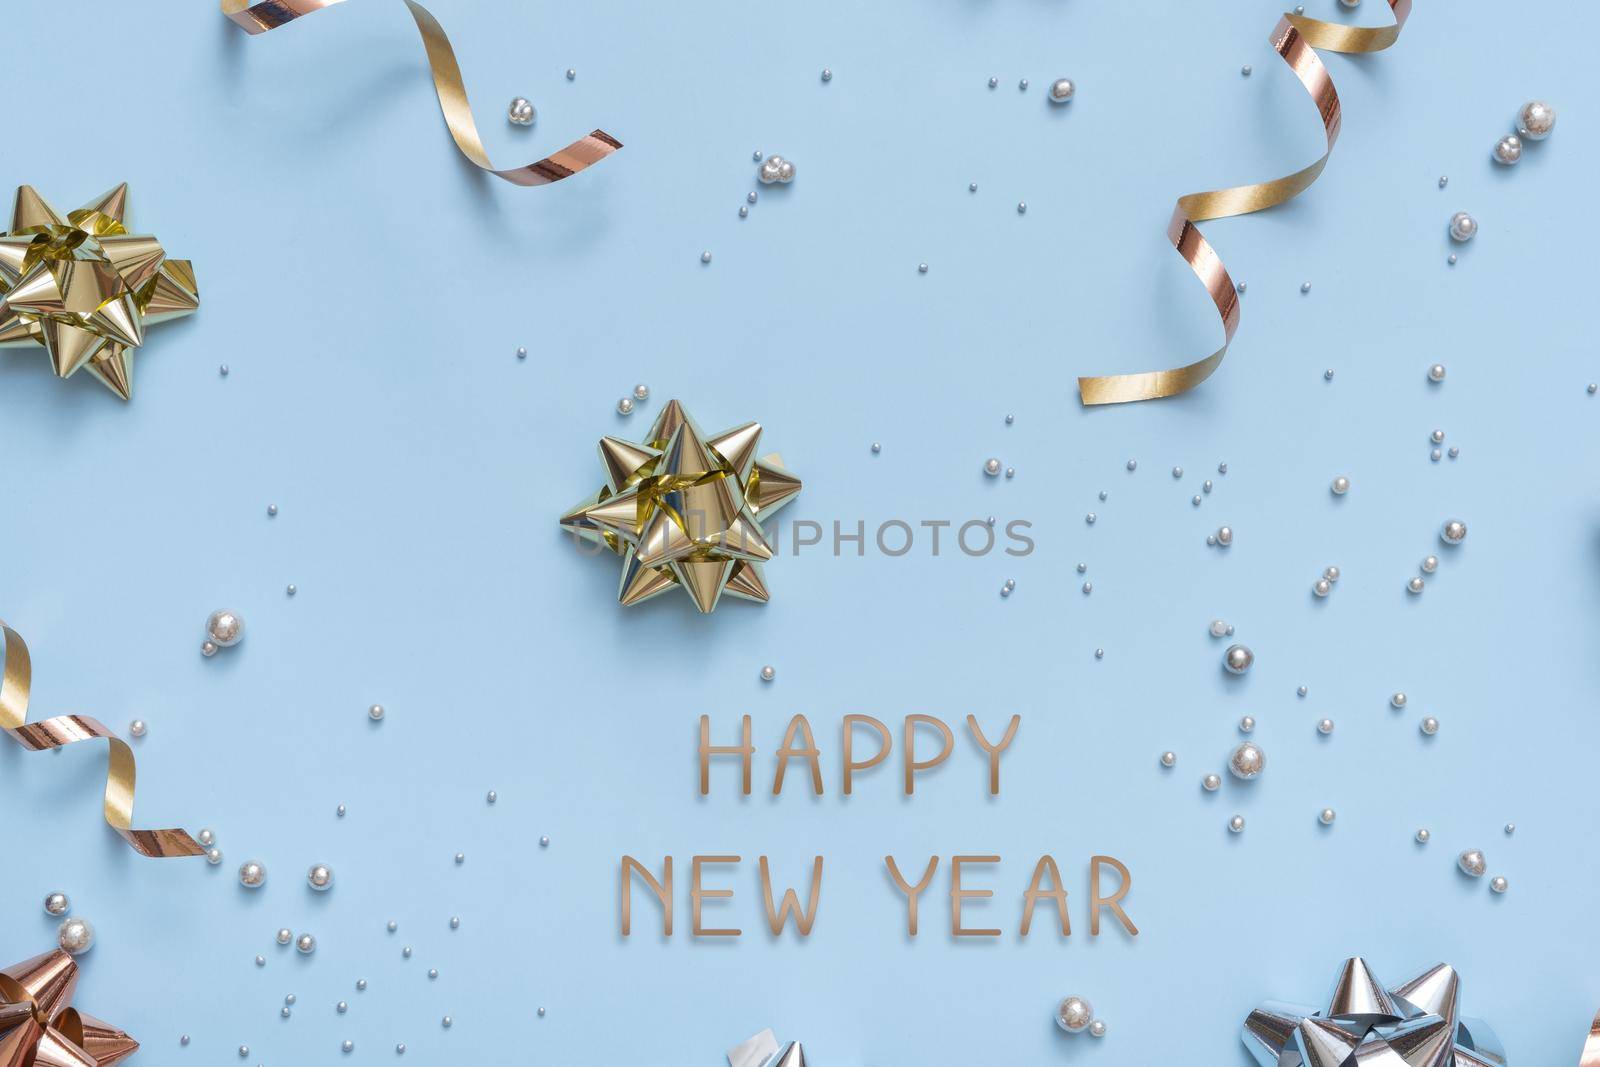 Happy new year text on bright festive background with bows and beads top view. New Year greeting background flat lay by ssvimaliss